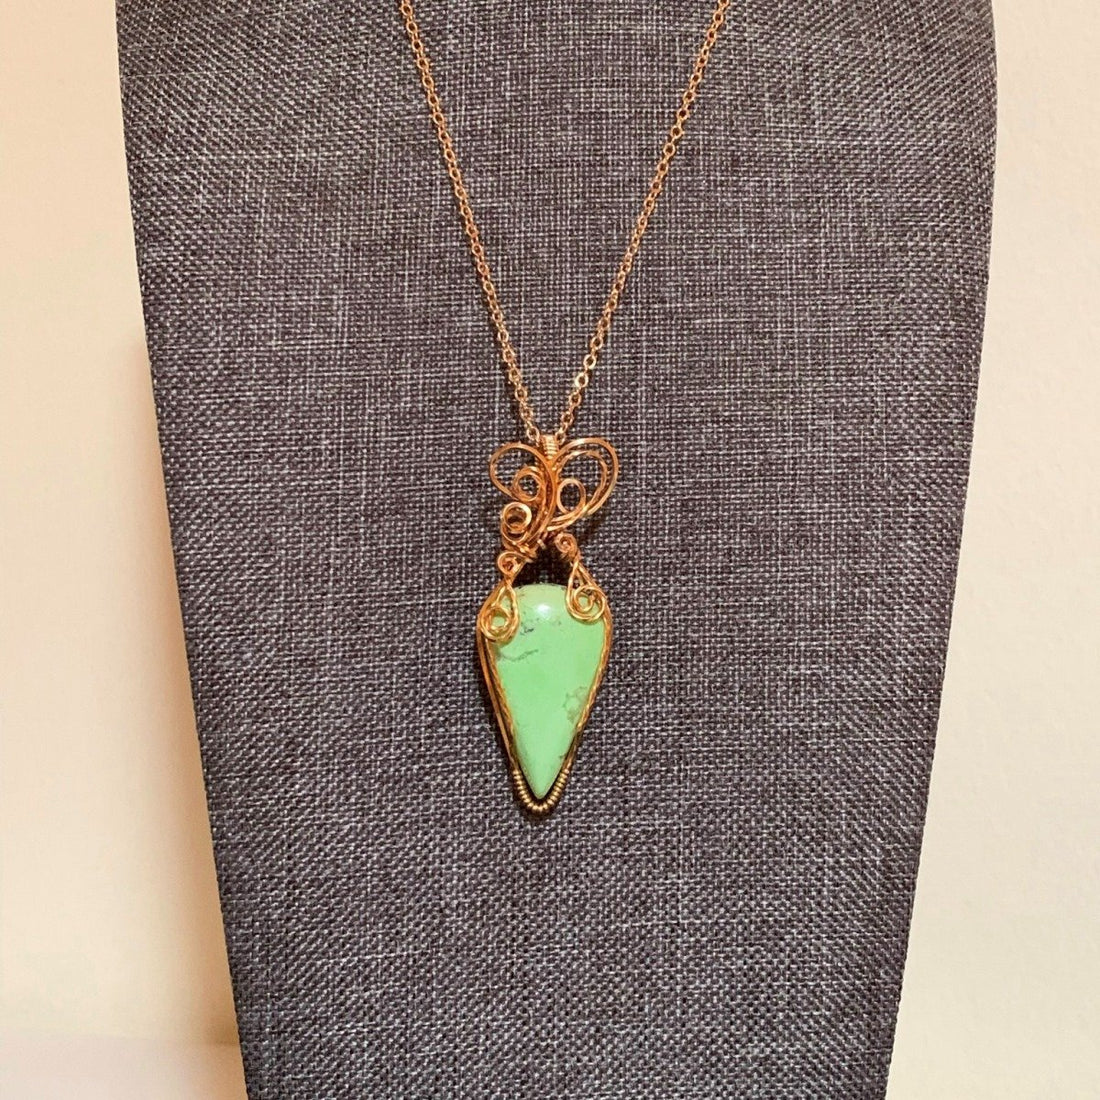 Pendant made of Lemon Chrysoprase Teardrop stone with gold wire wrap; .75" w x 2.25" l, incl bail